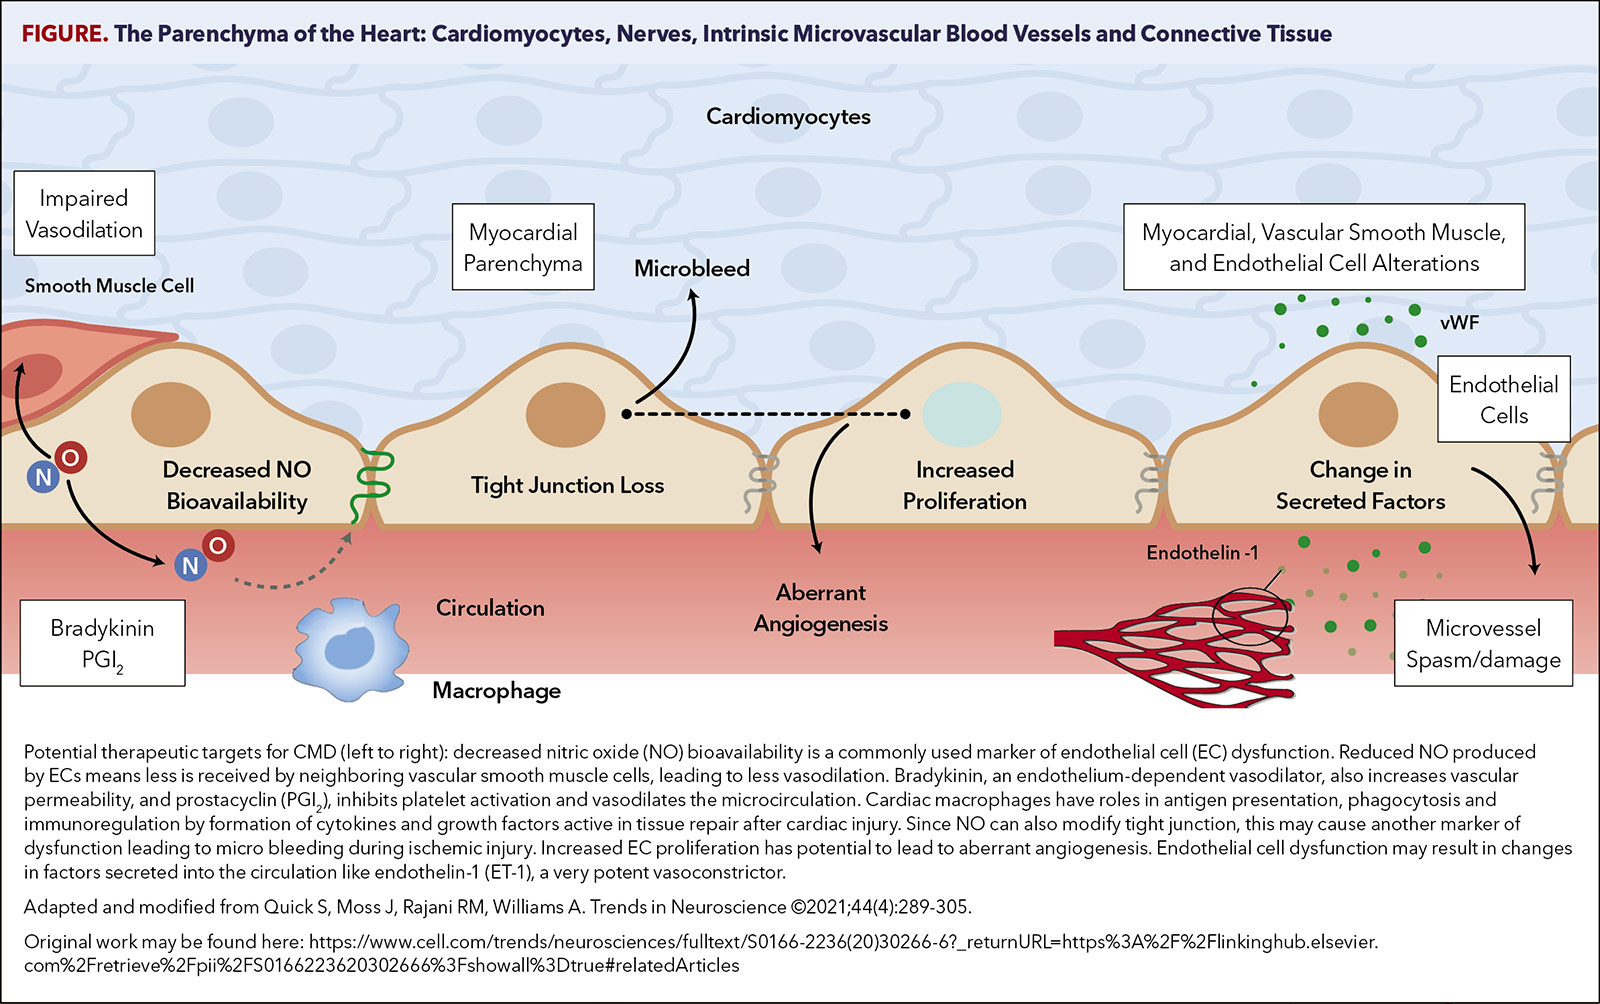 Treatment Options For Coronary Microvascular Dysfunction